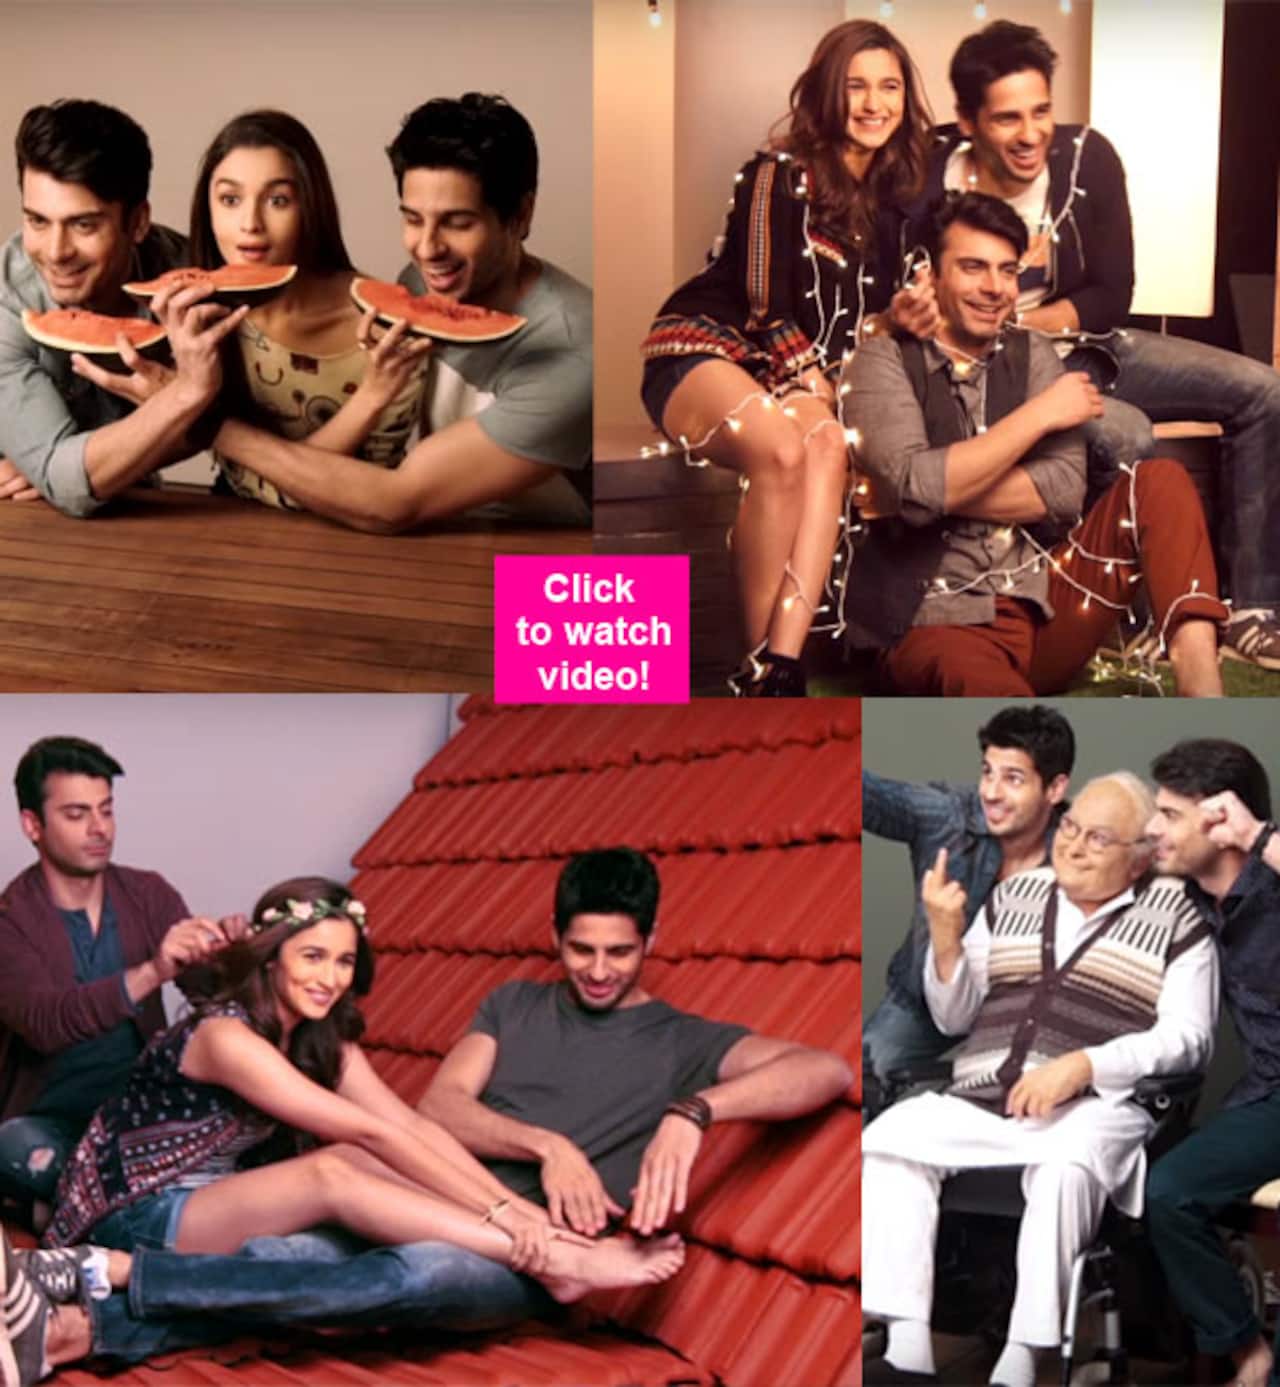 Kapoor & Sons poster making video: Alia Bhatt, Sidharth Malhotra and Fawad  Khan show off their GOOFY side! - Bollywood News & Gossip, Movie Reviews,  Trailers & Videos at 